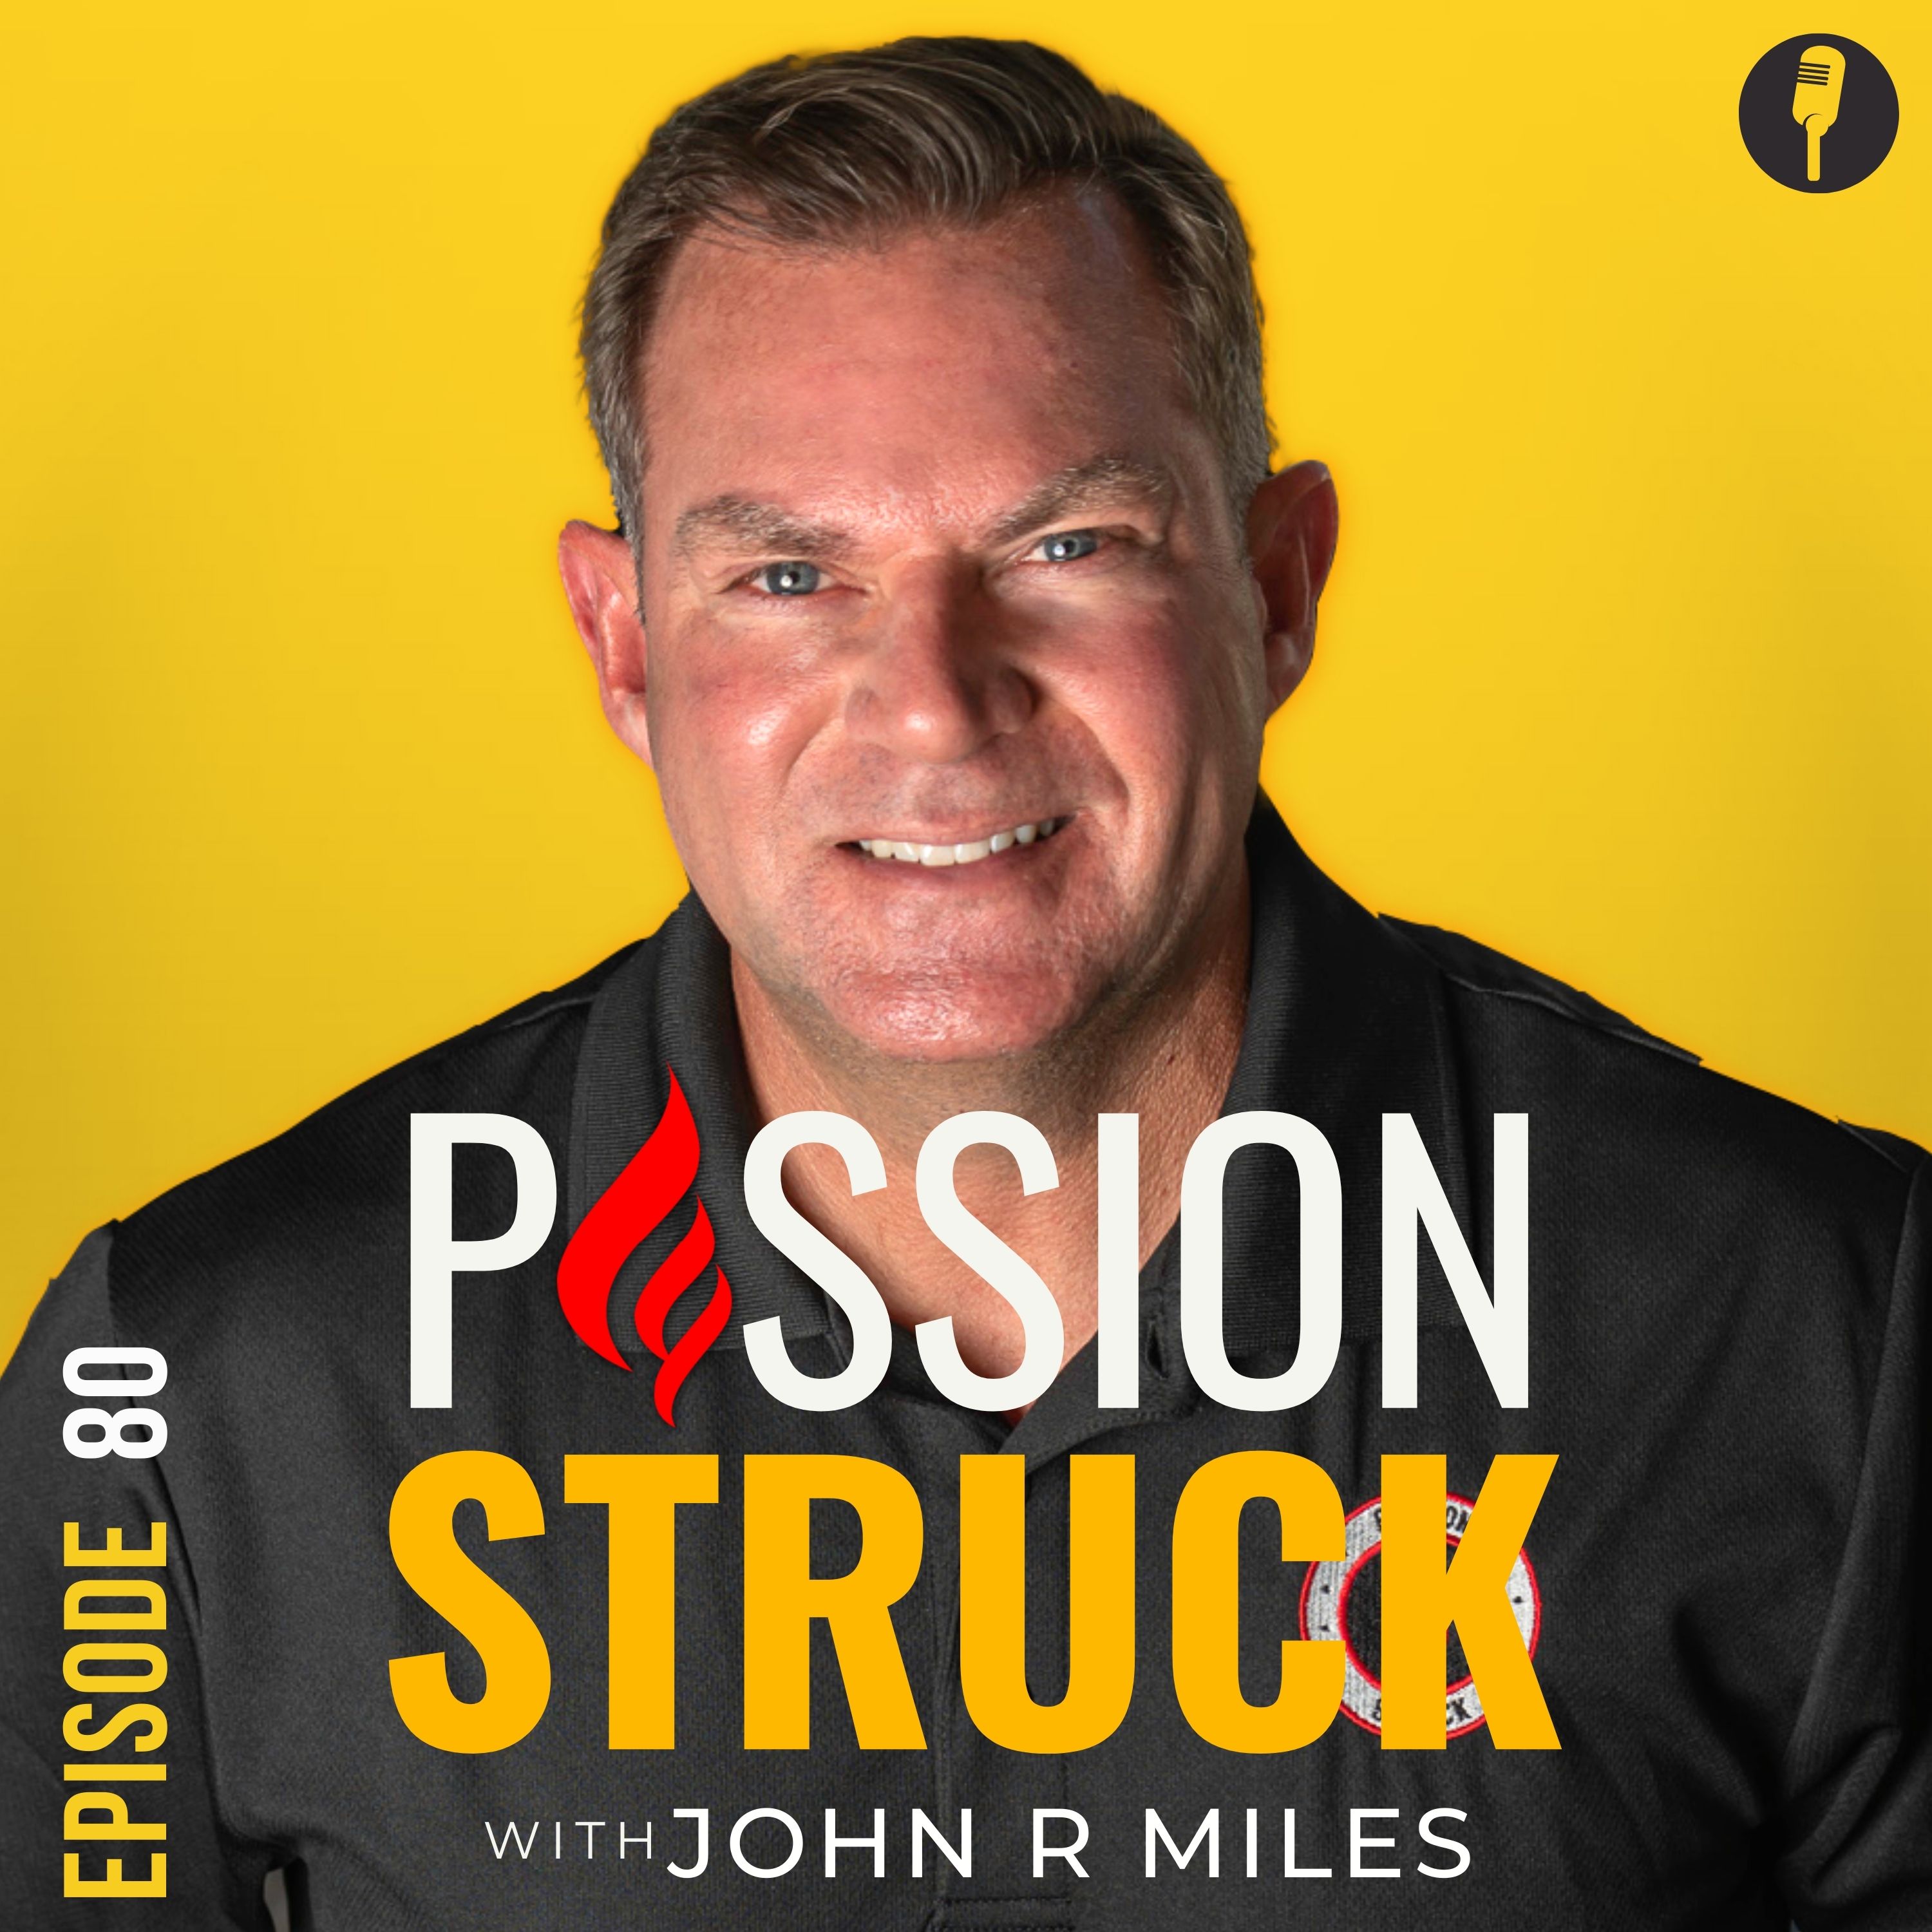 Passion Struck Podcast Album Cover for Episode 80 with John R. Miles on feeling insecure